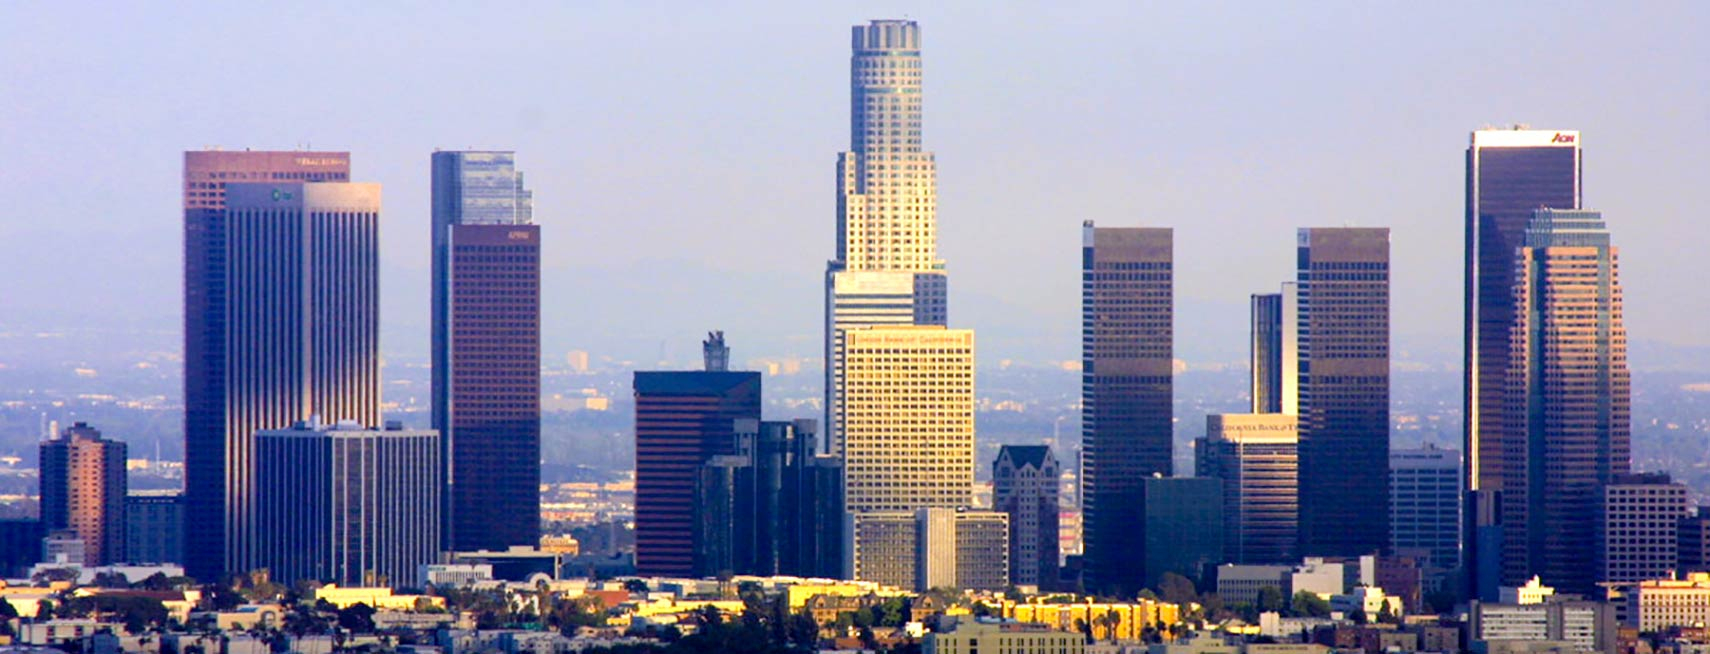 Google Map Of The City Los Angeles, Usa - Nations Online Project - Los Angeles California Google Maps